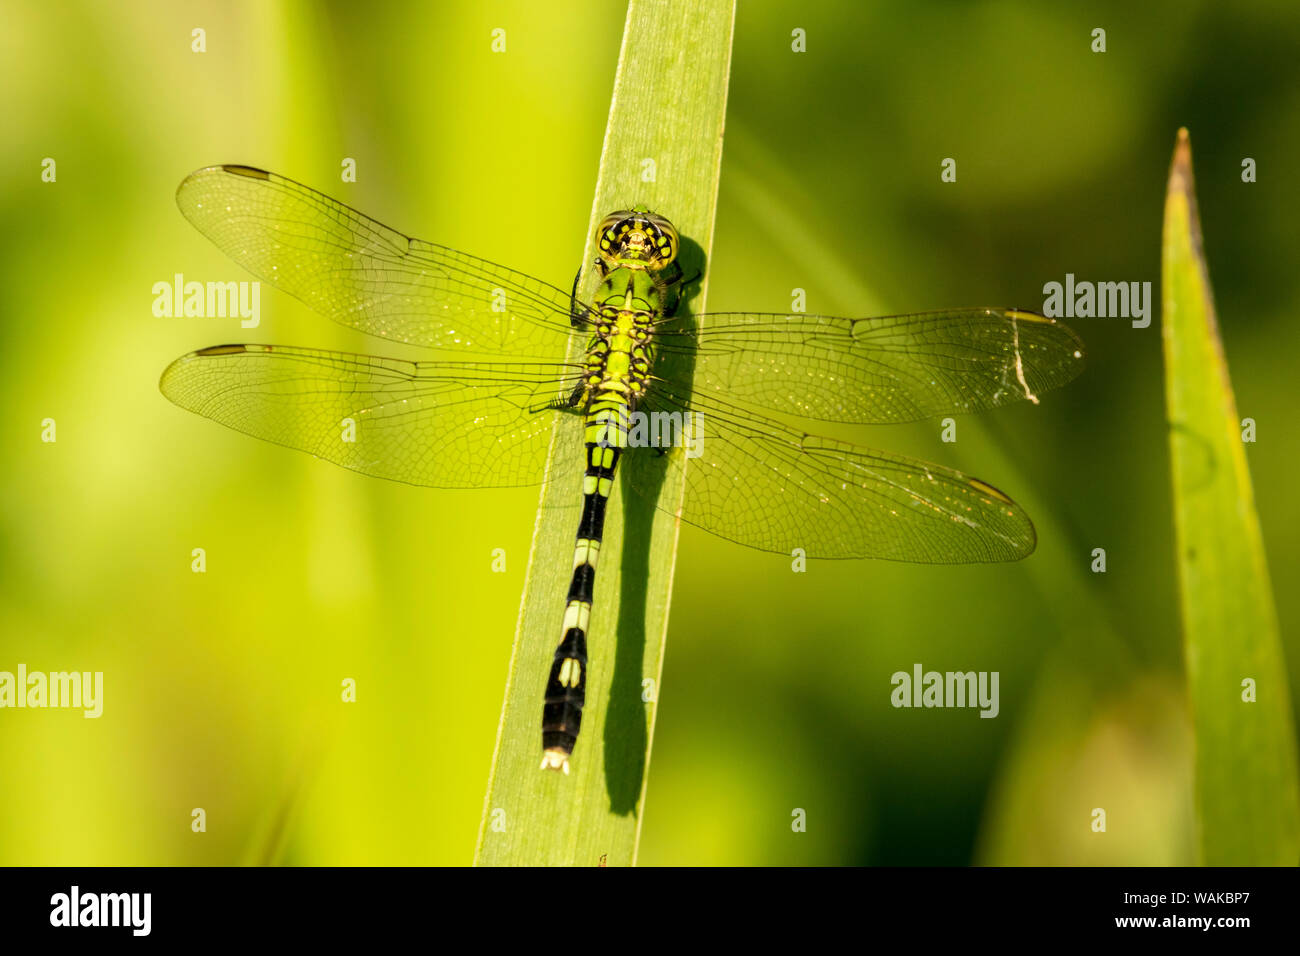 USA, Louisiana, Lake Martin. Green clearwing dragonfly on leaf. Credit as: Cathy and Gordon Illg / Jaynes Gallery / DanitaDelimont.com Stock Photo